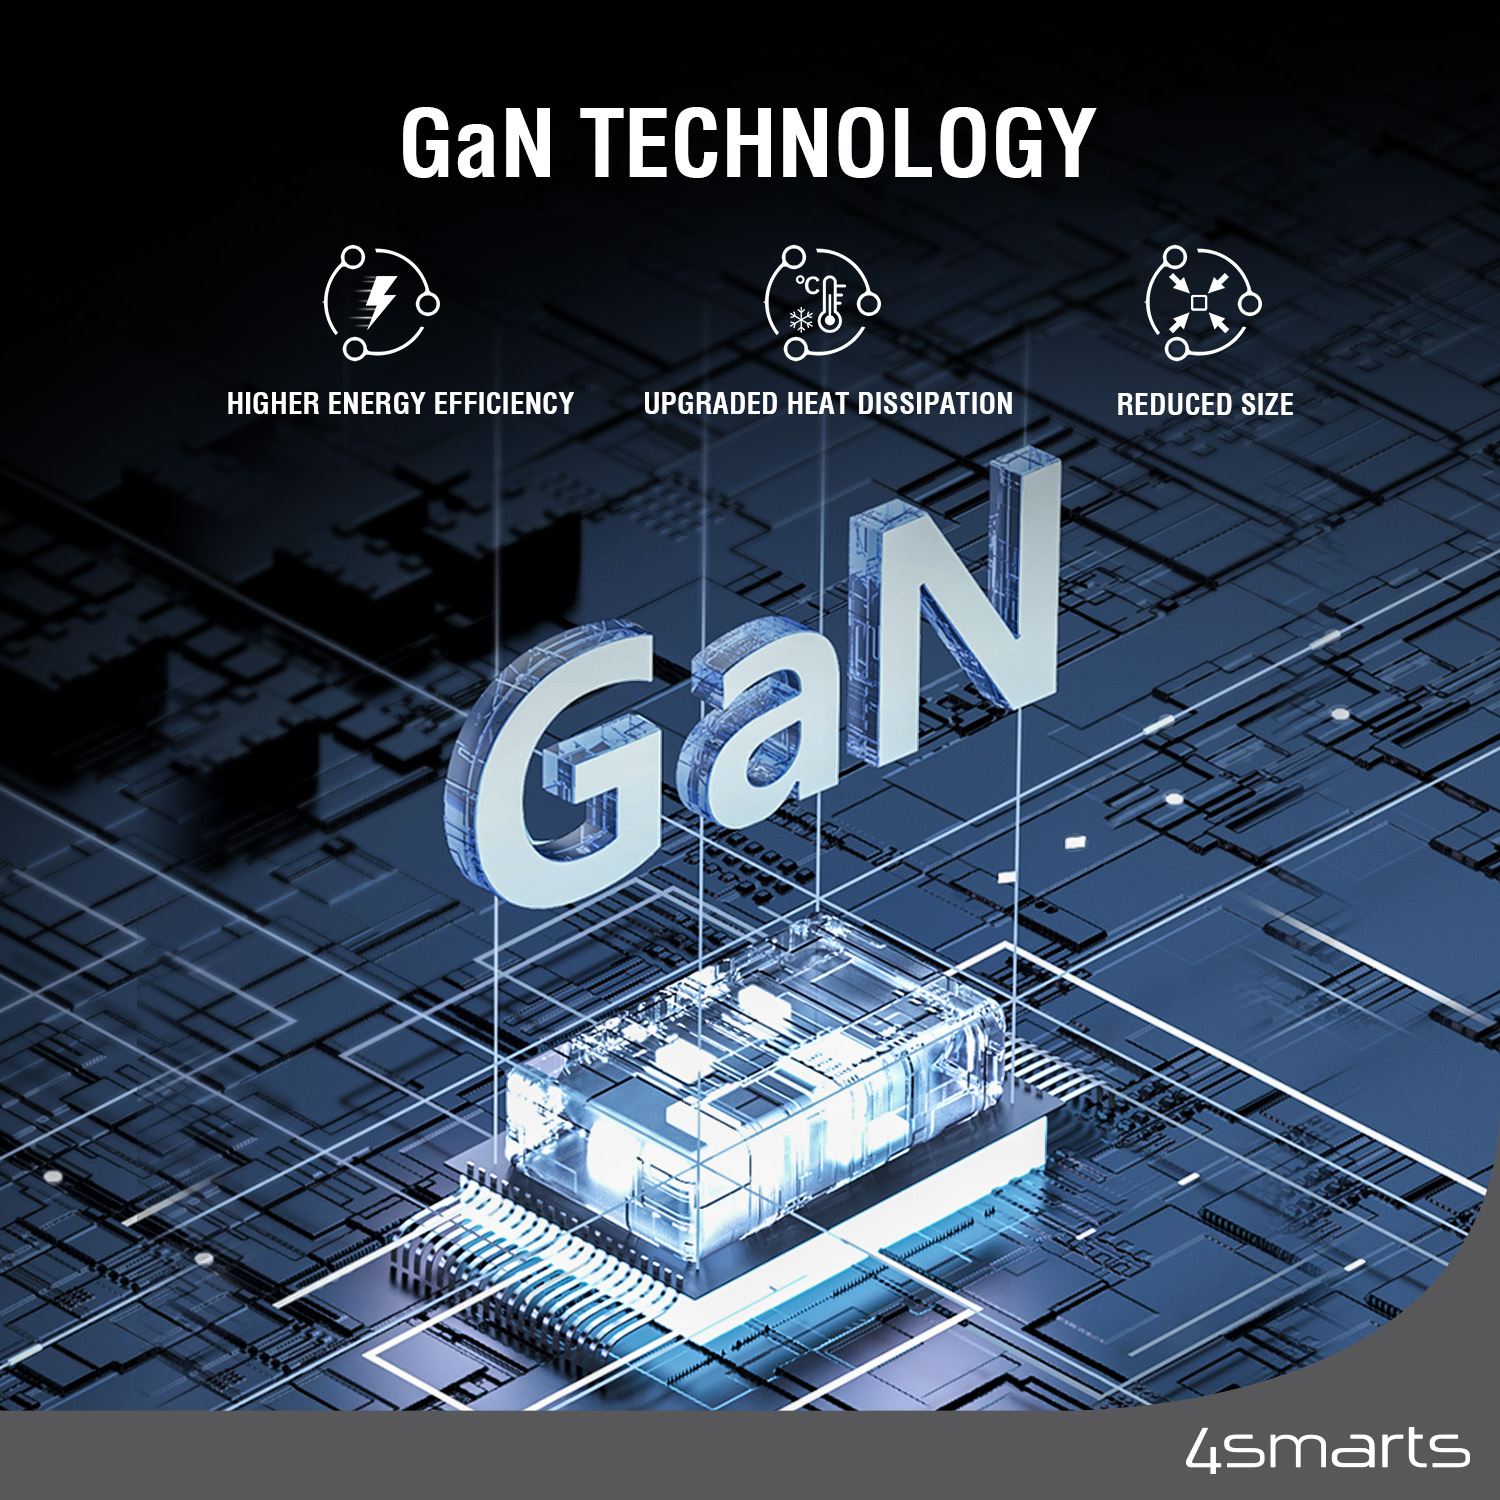 The 4smarts 7in1 GaN charging station with GaN technology offers safe and efficient charging with low heat generation.